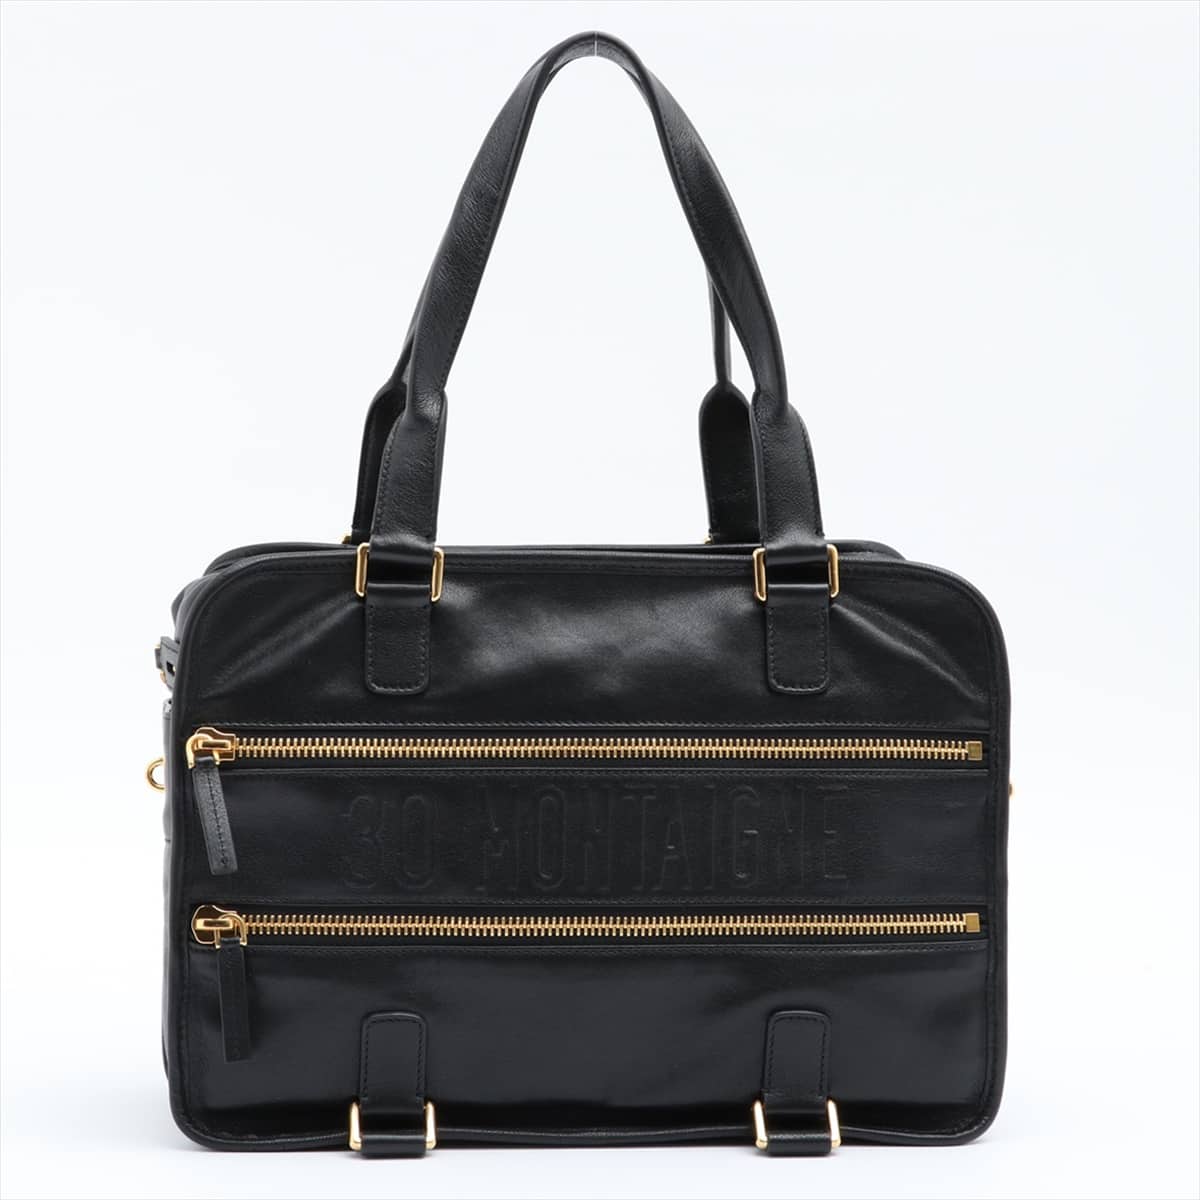 Christian Dior Leather Hand bag Black There is some glitter on the inside